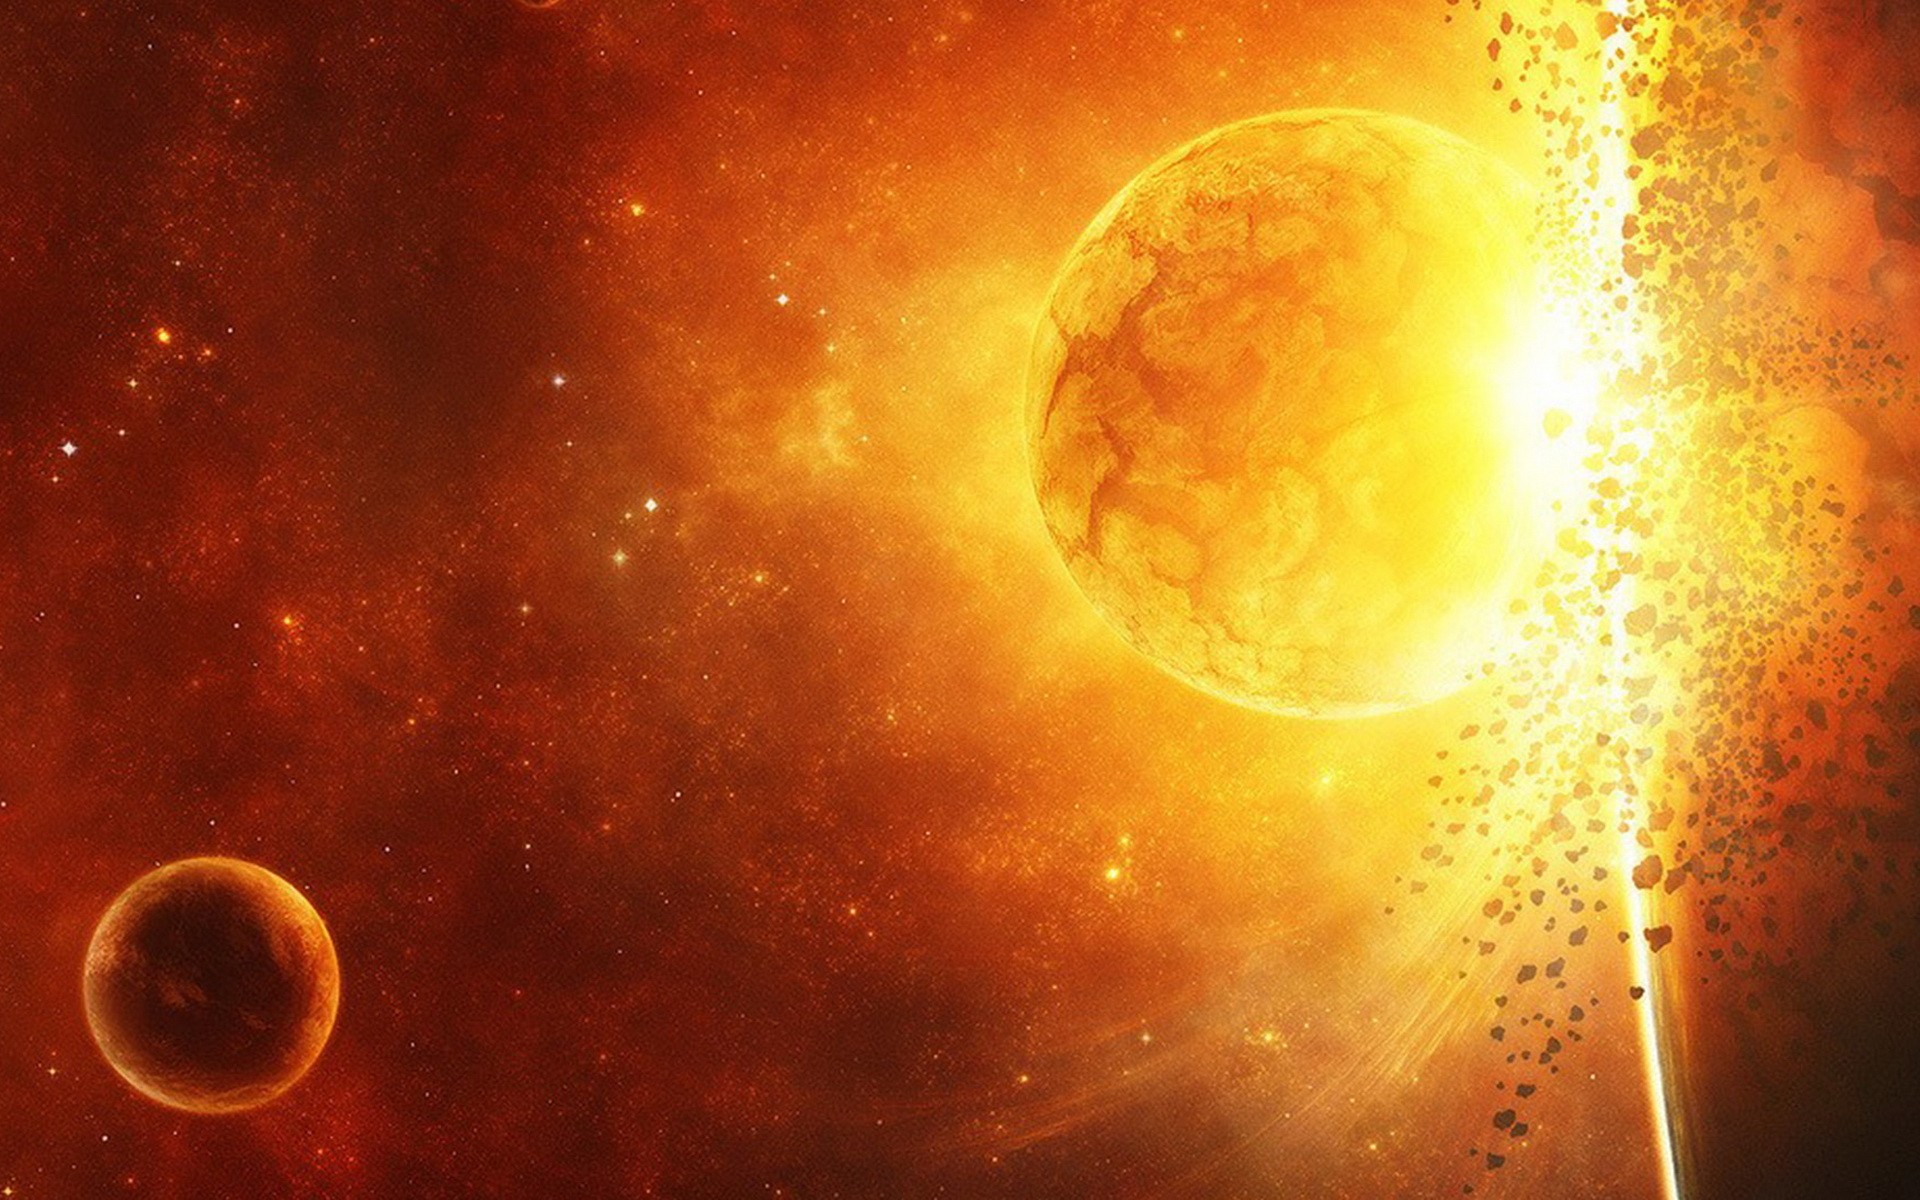 outer, Space, Stars, Planets, Catastrophe, Explosion Wallpaper